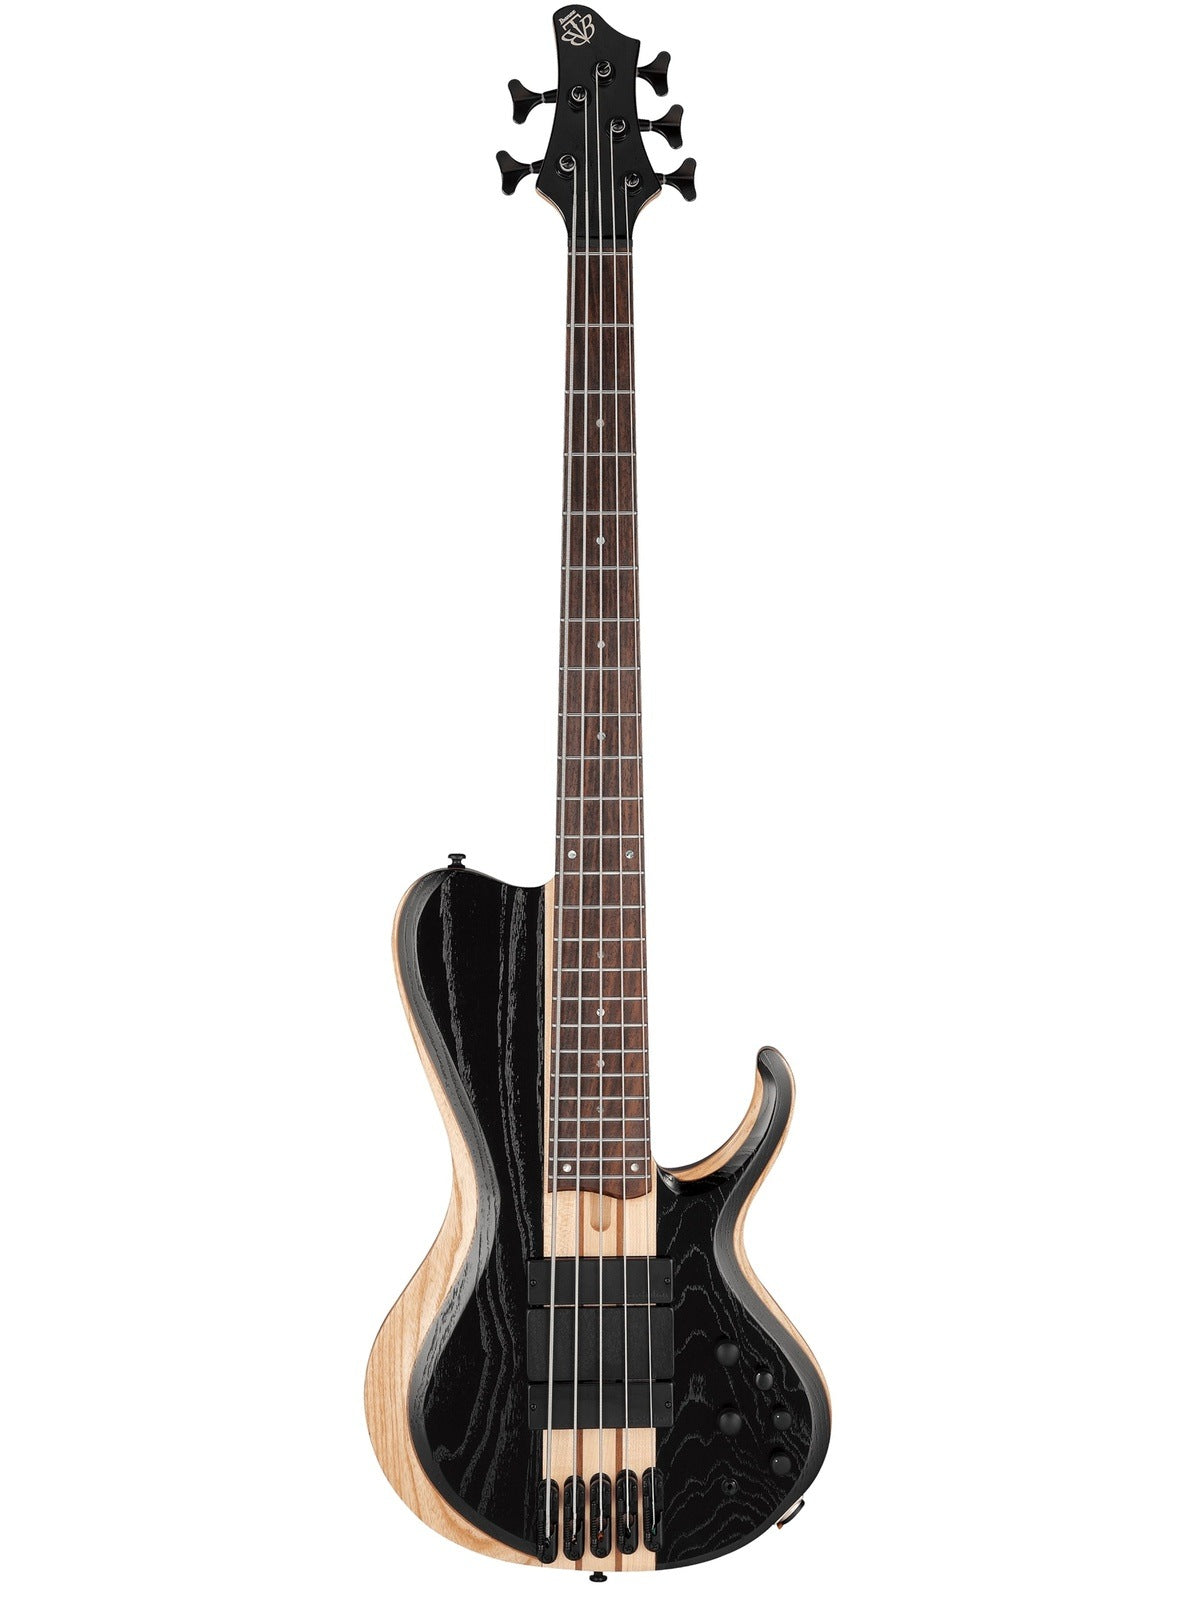 Ibanez BTB865SC 5-String Electric Bass, Weathered Black Low Gloss